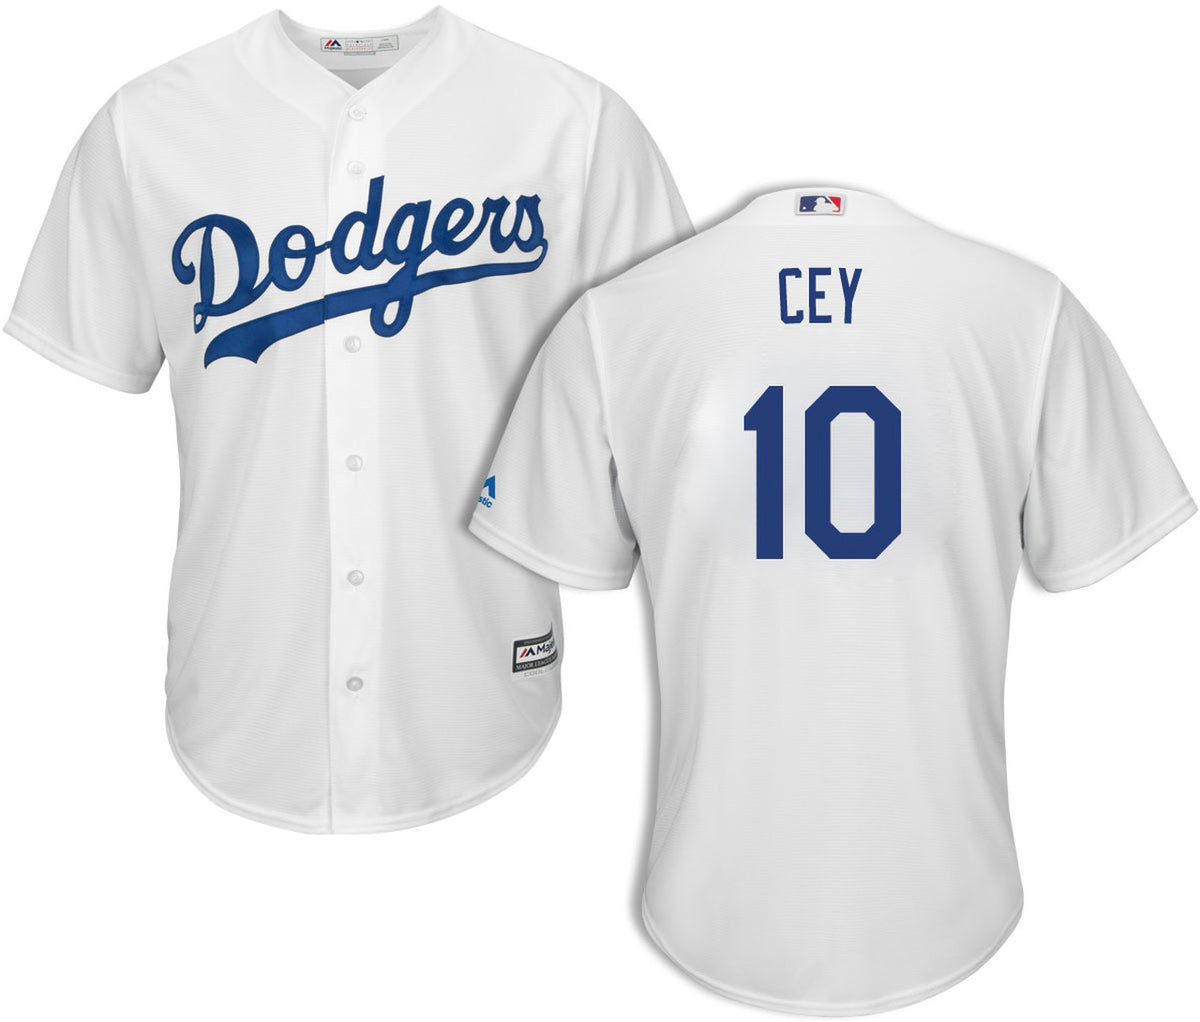 Los Angeles Dodgers Mens Jersey Majestic Throwback #10 Cey Replica Jer –  THE 4TH QUARTER